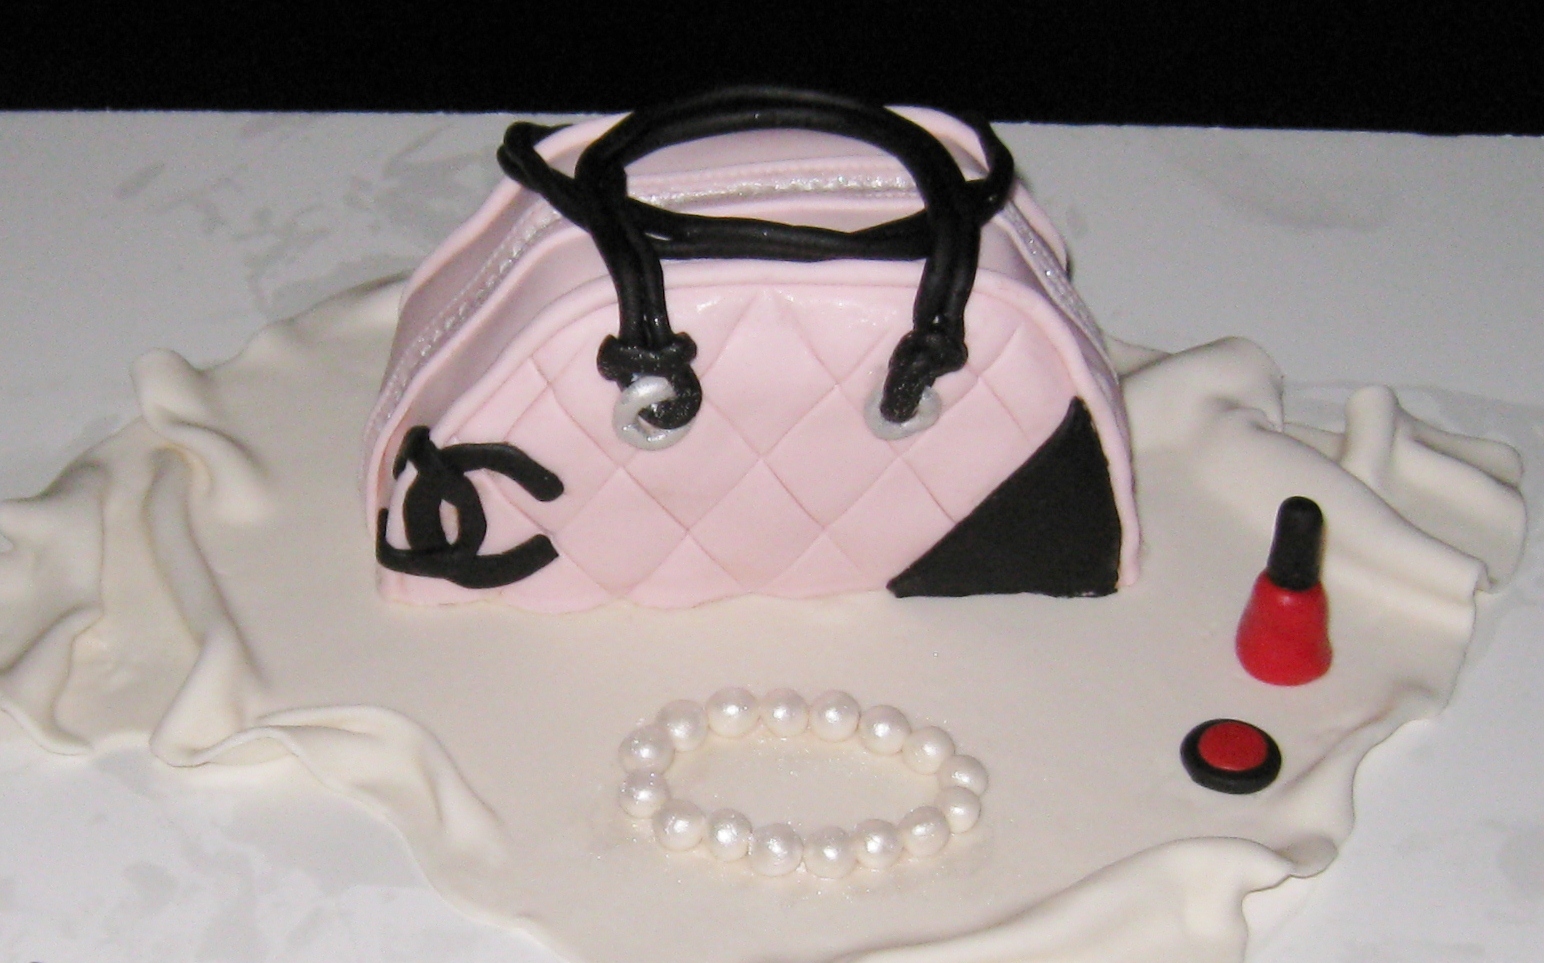 deWishes delights: Chanel Purse Cake